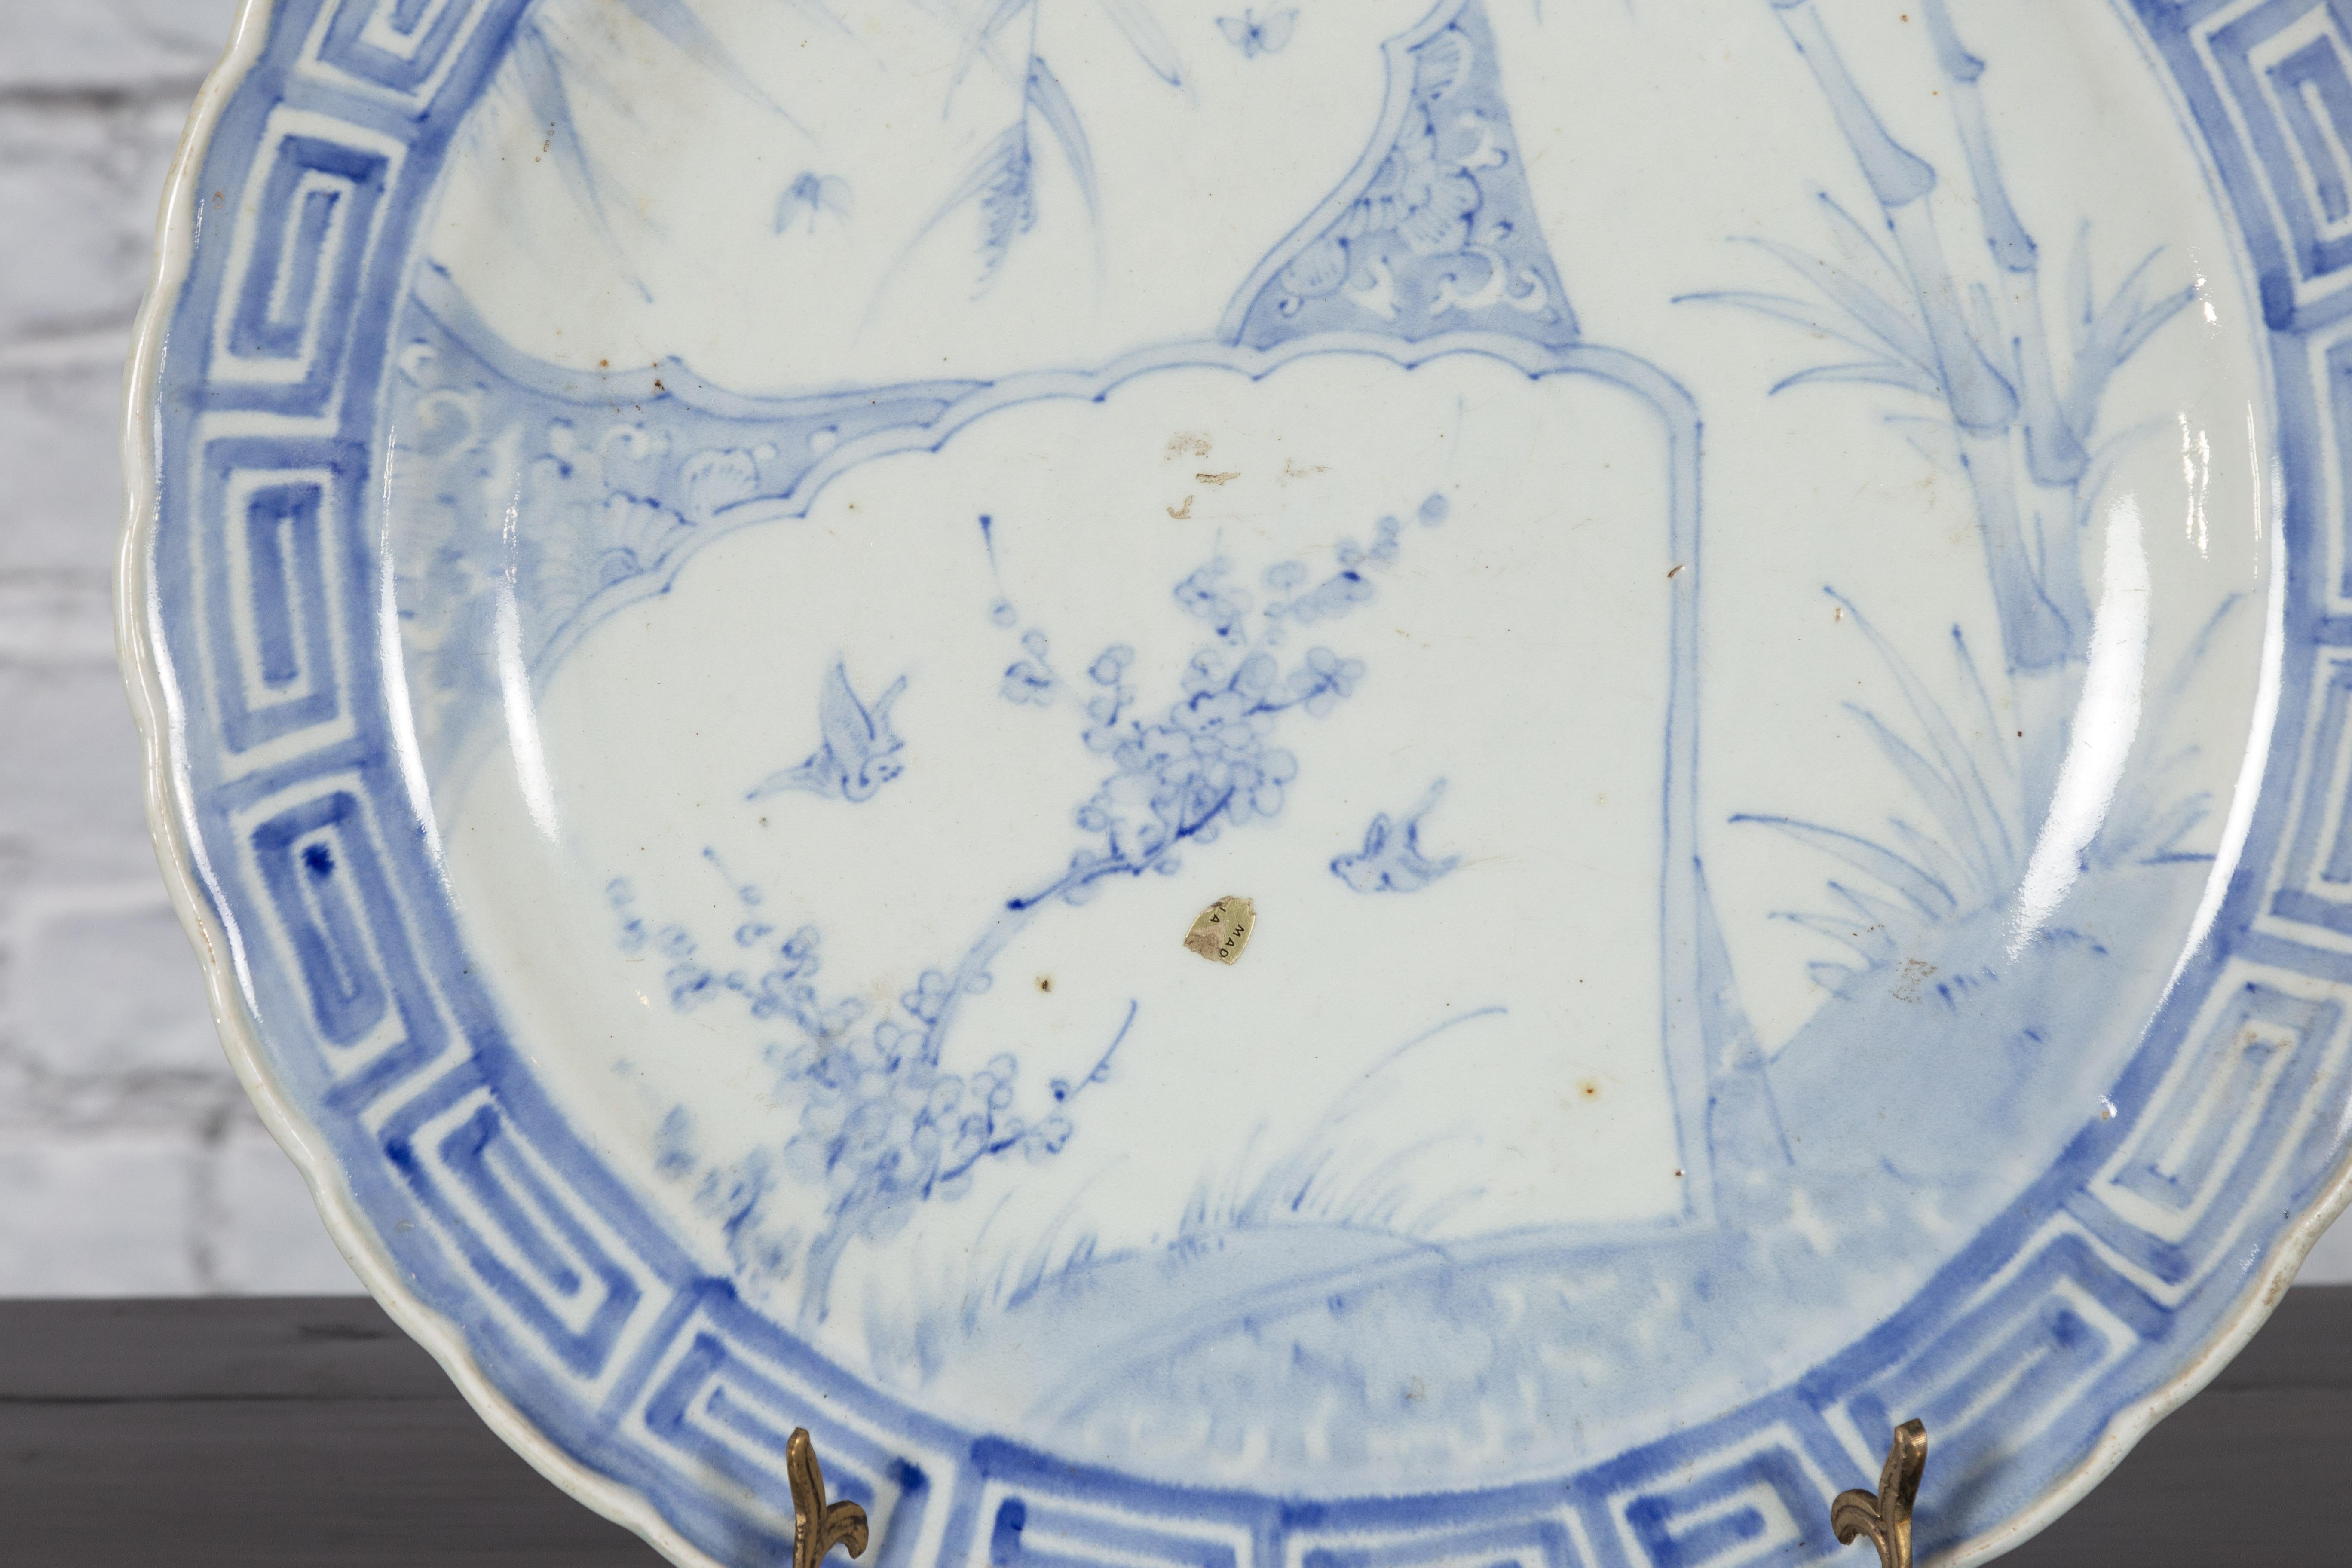 19th Century Japanese Porcelain Plate with Blue and White Bird and Bamboo Motifs In Good Condition For Sale In Yonkers, NY